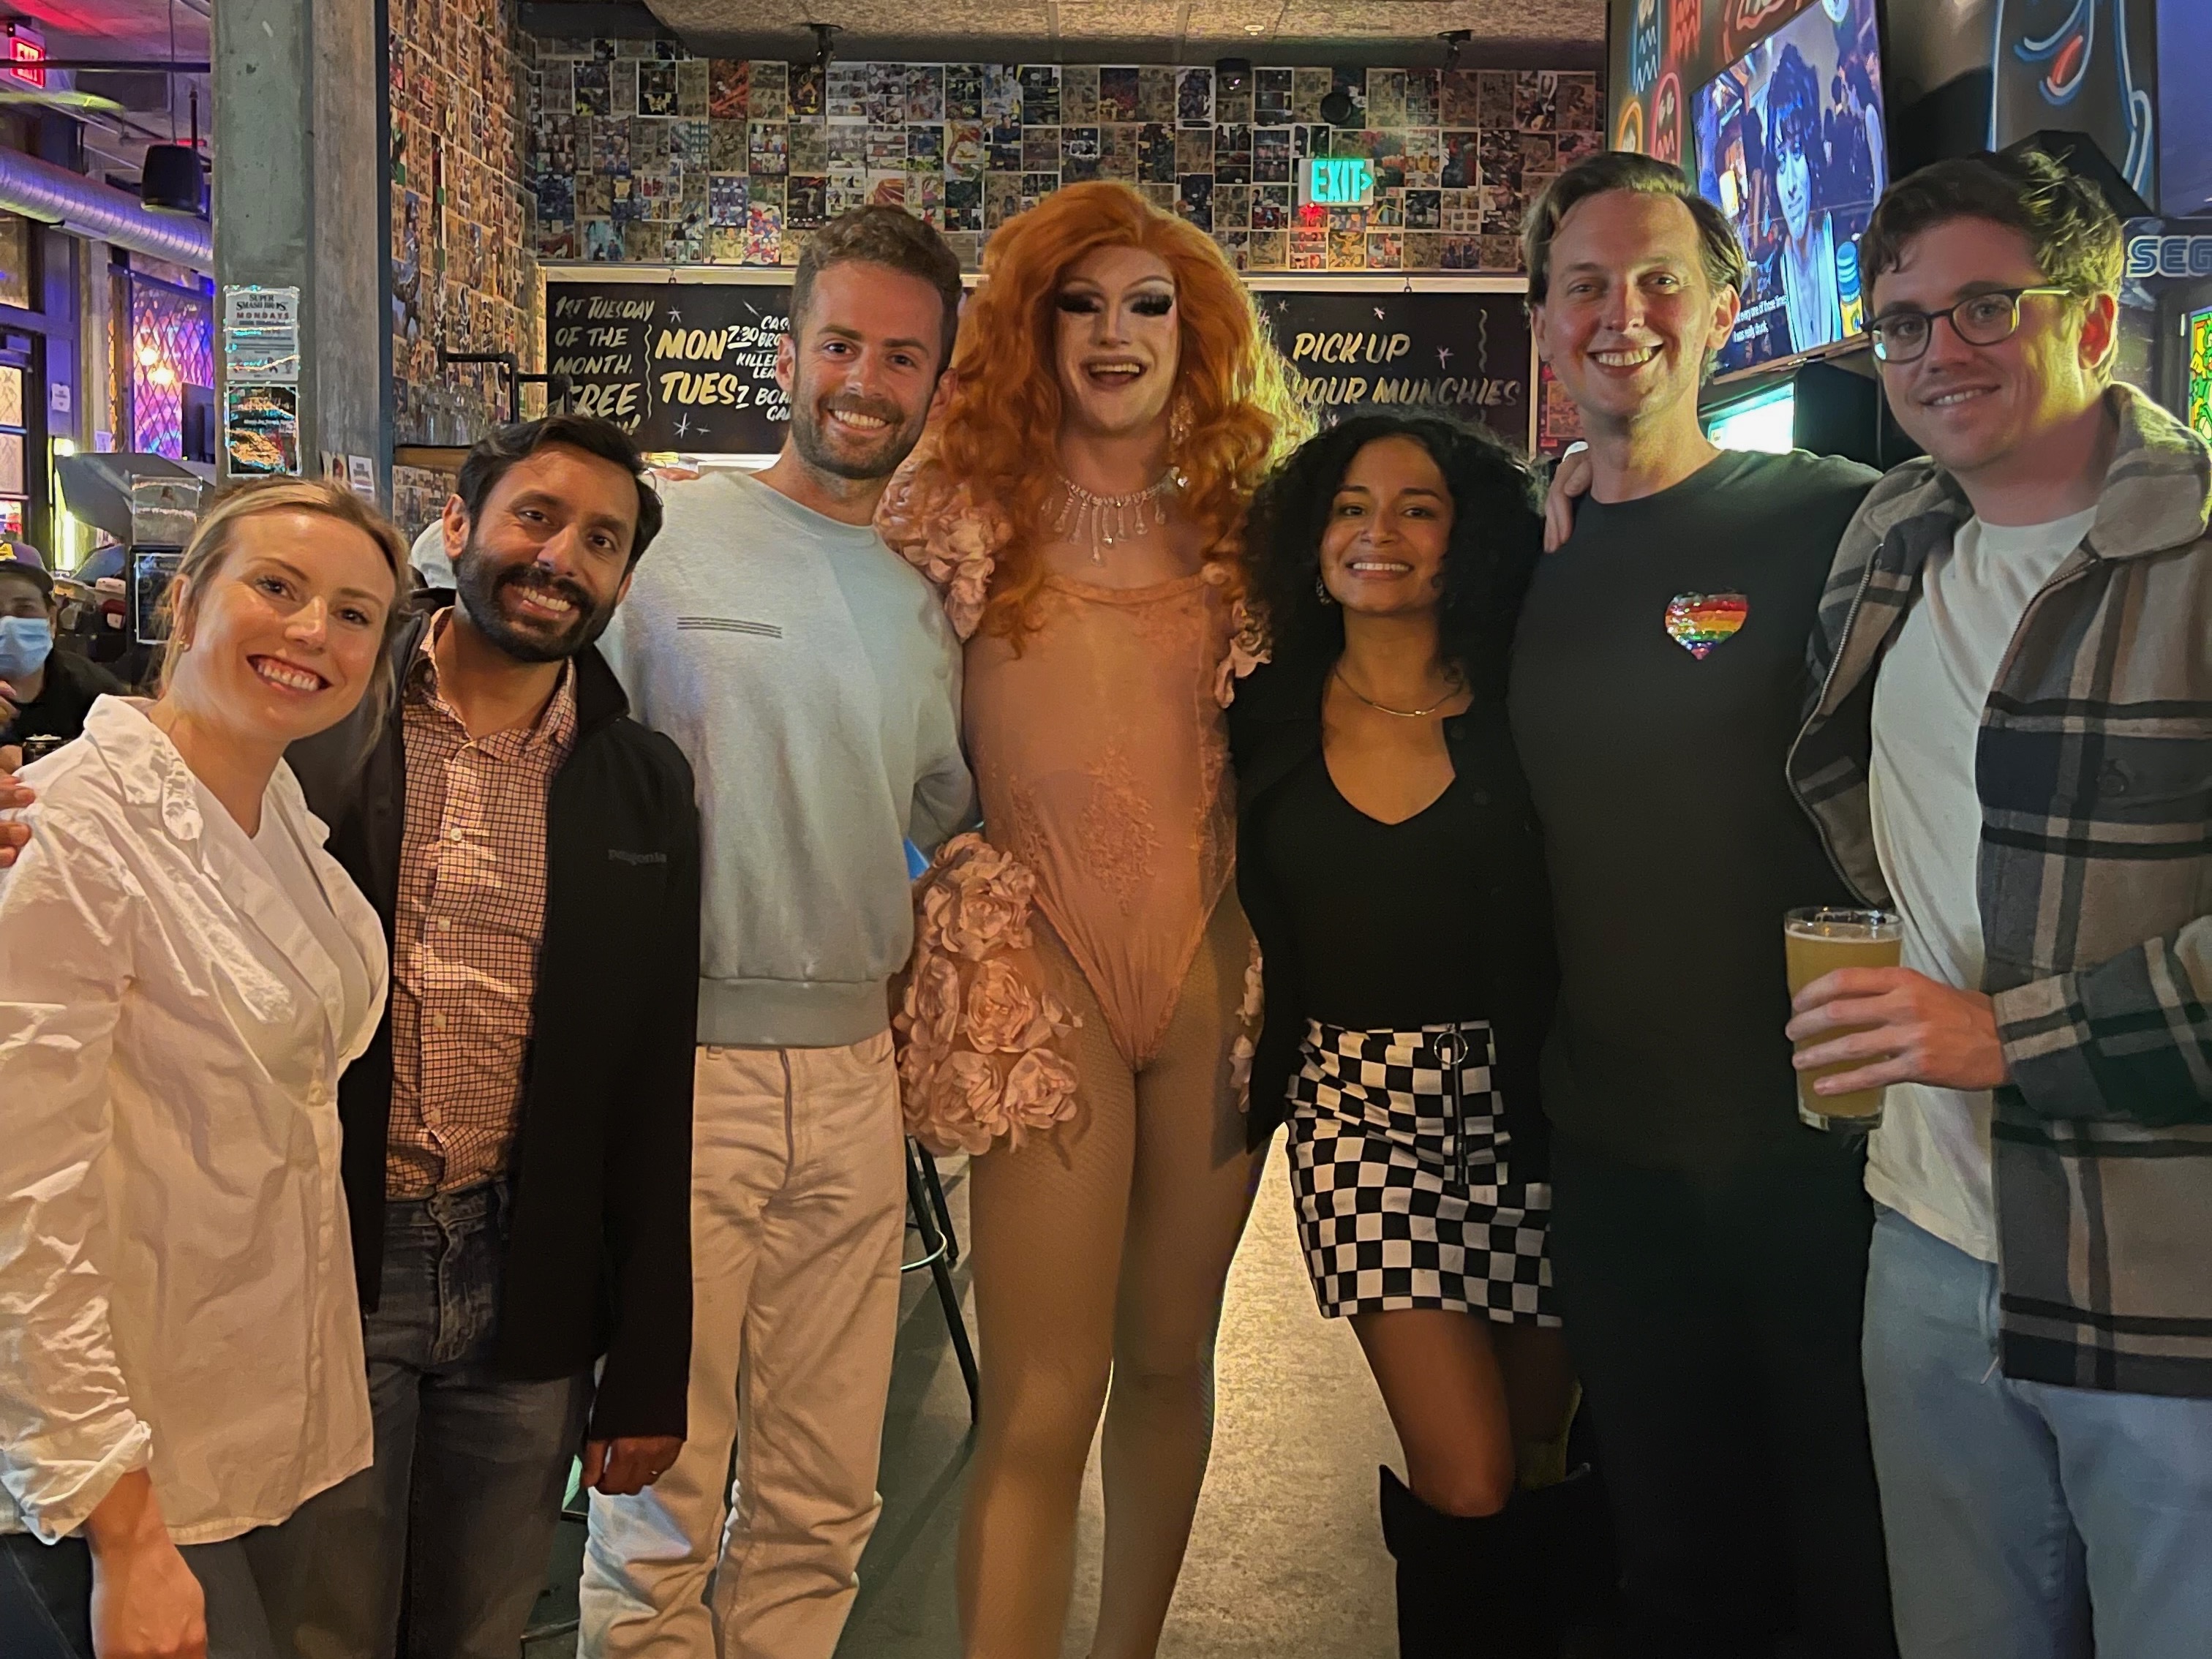 Celonis team members with game host at Drag Bingo event.